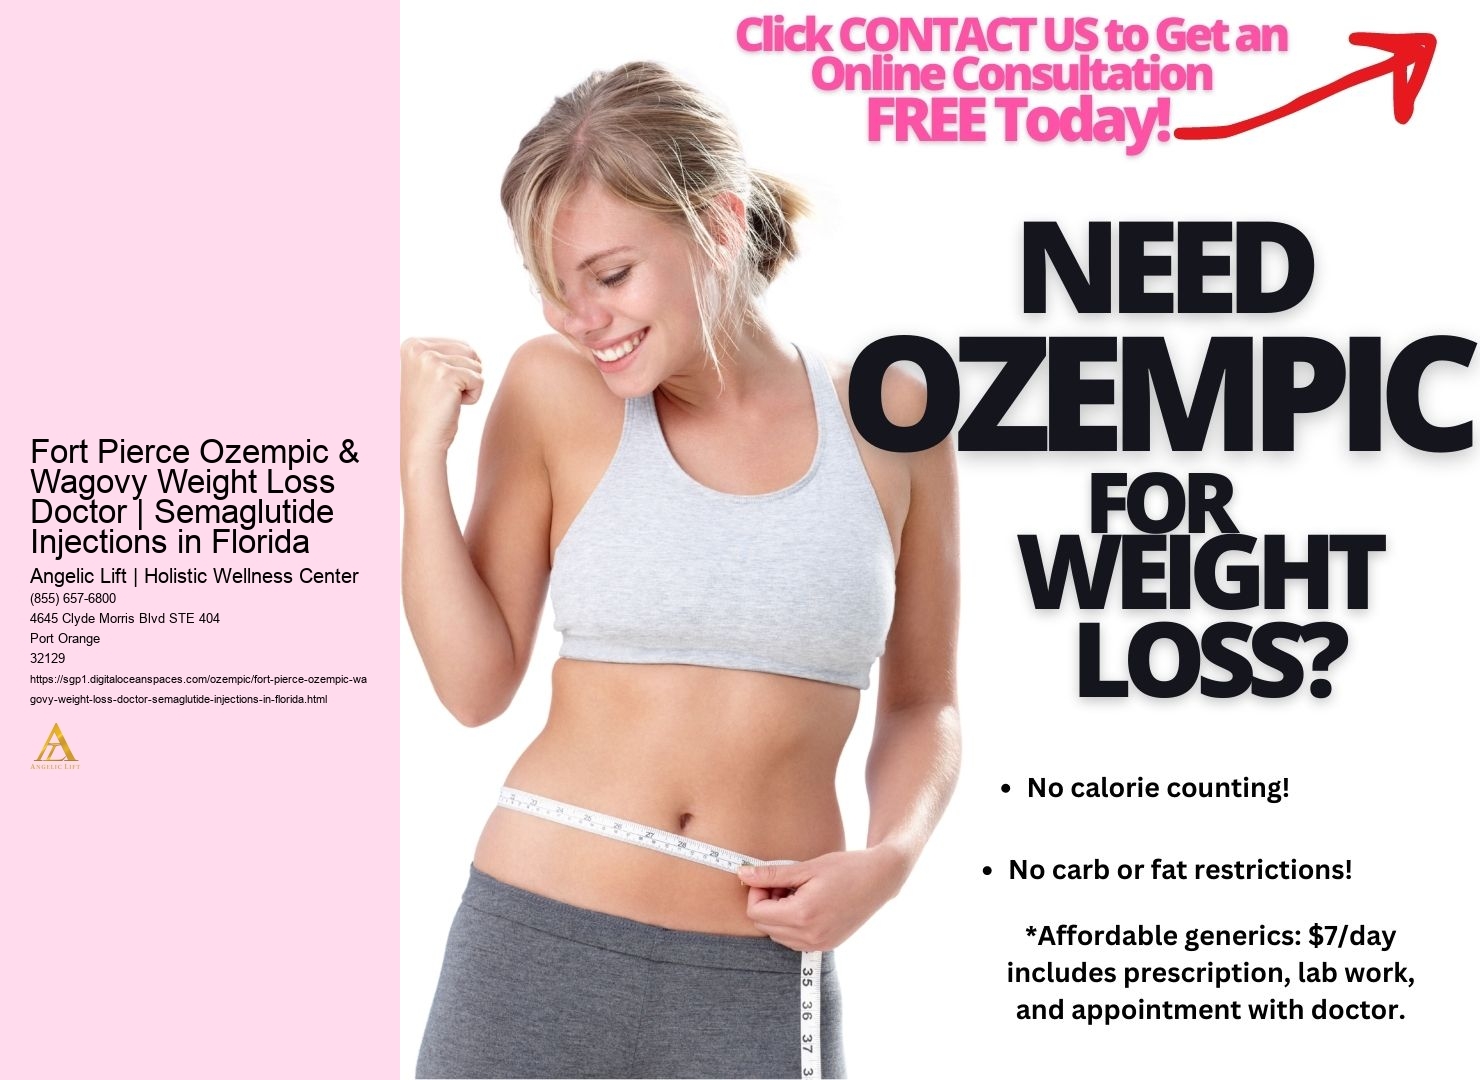 Fort Pierce Ozempic & Wagovy Weight Loss Doctor | Semaglutide Injections in Florida